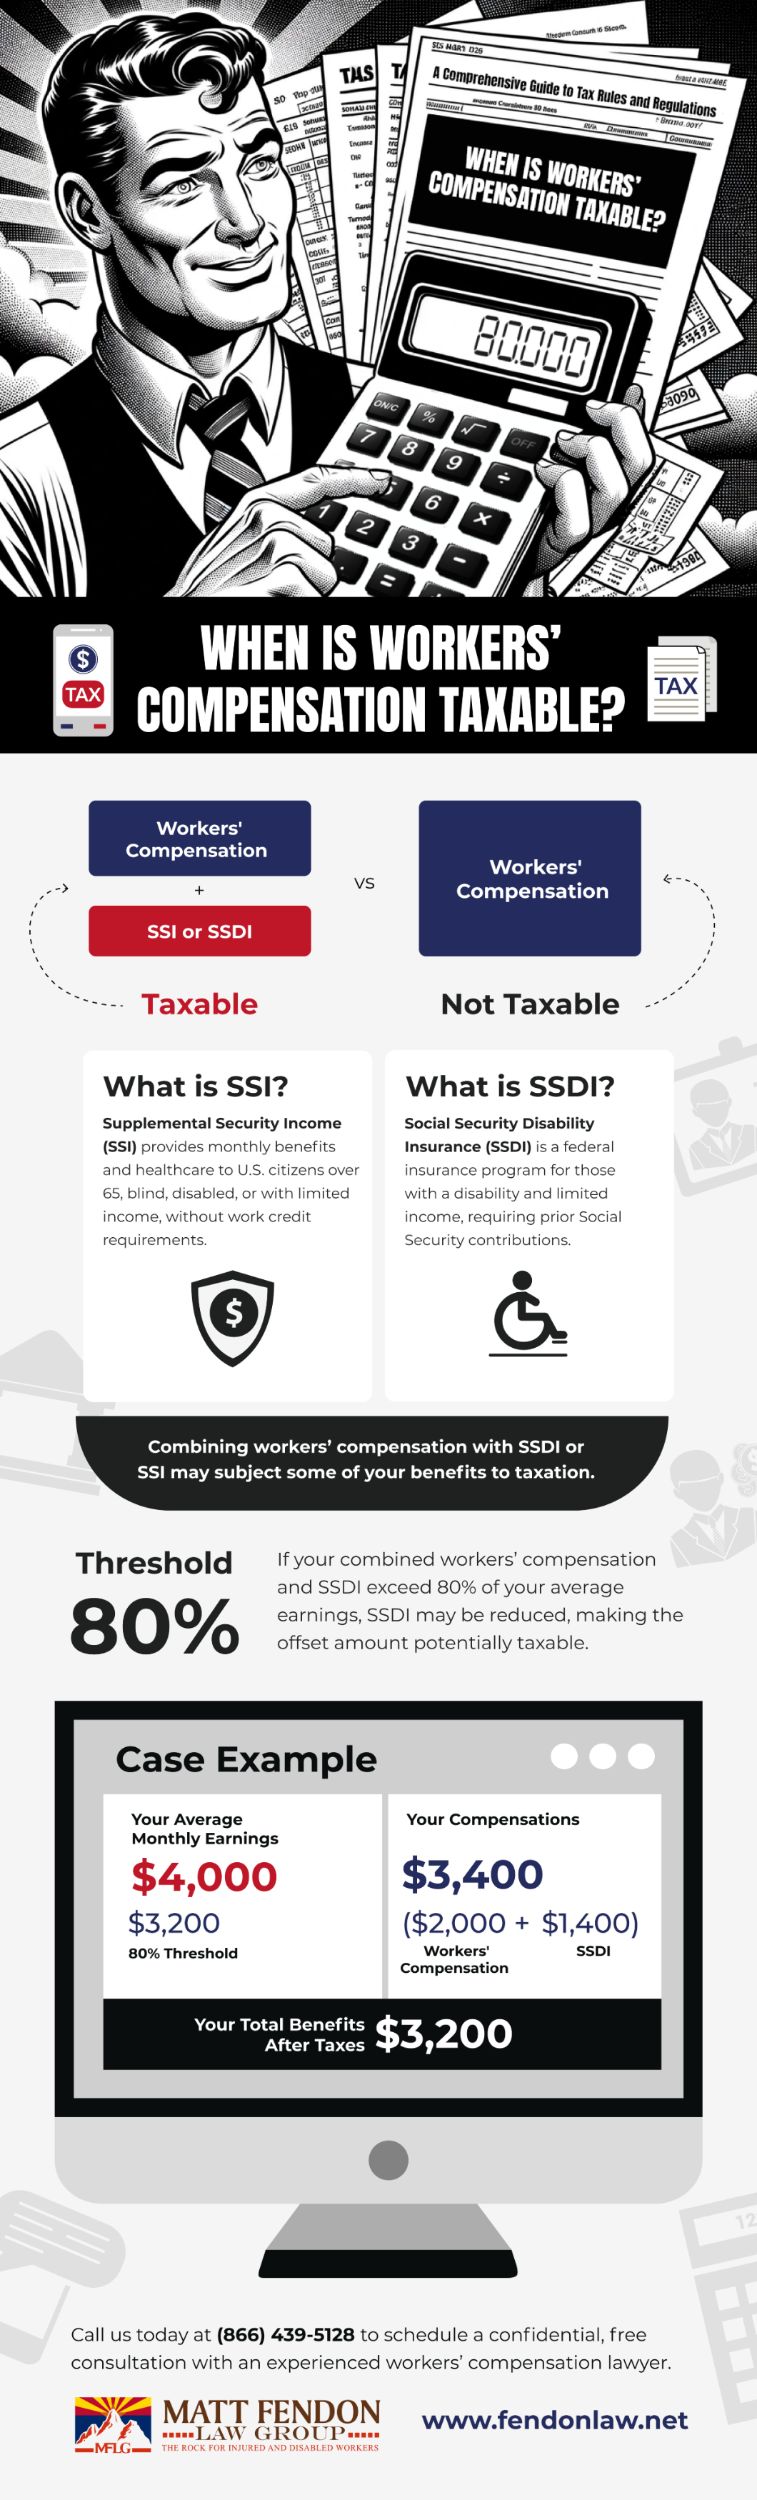 When is workers' compensation taxable?